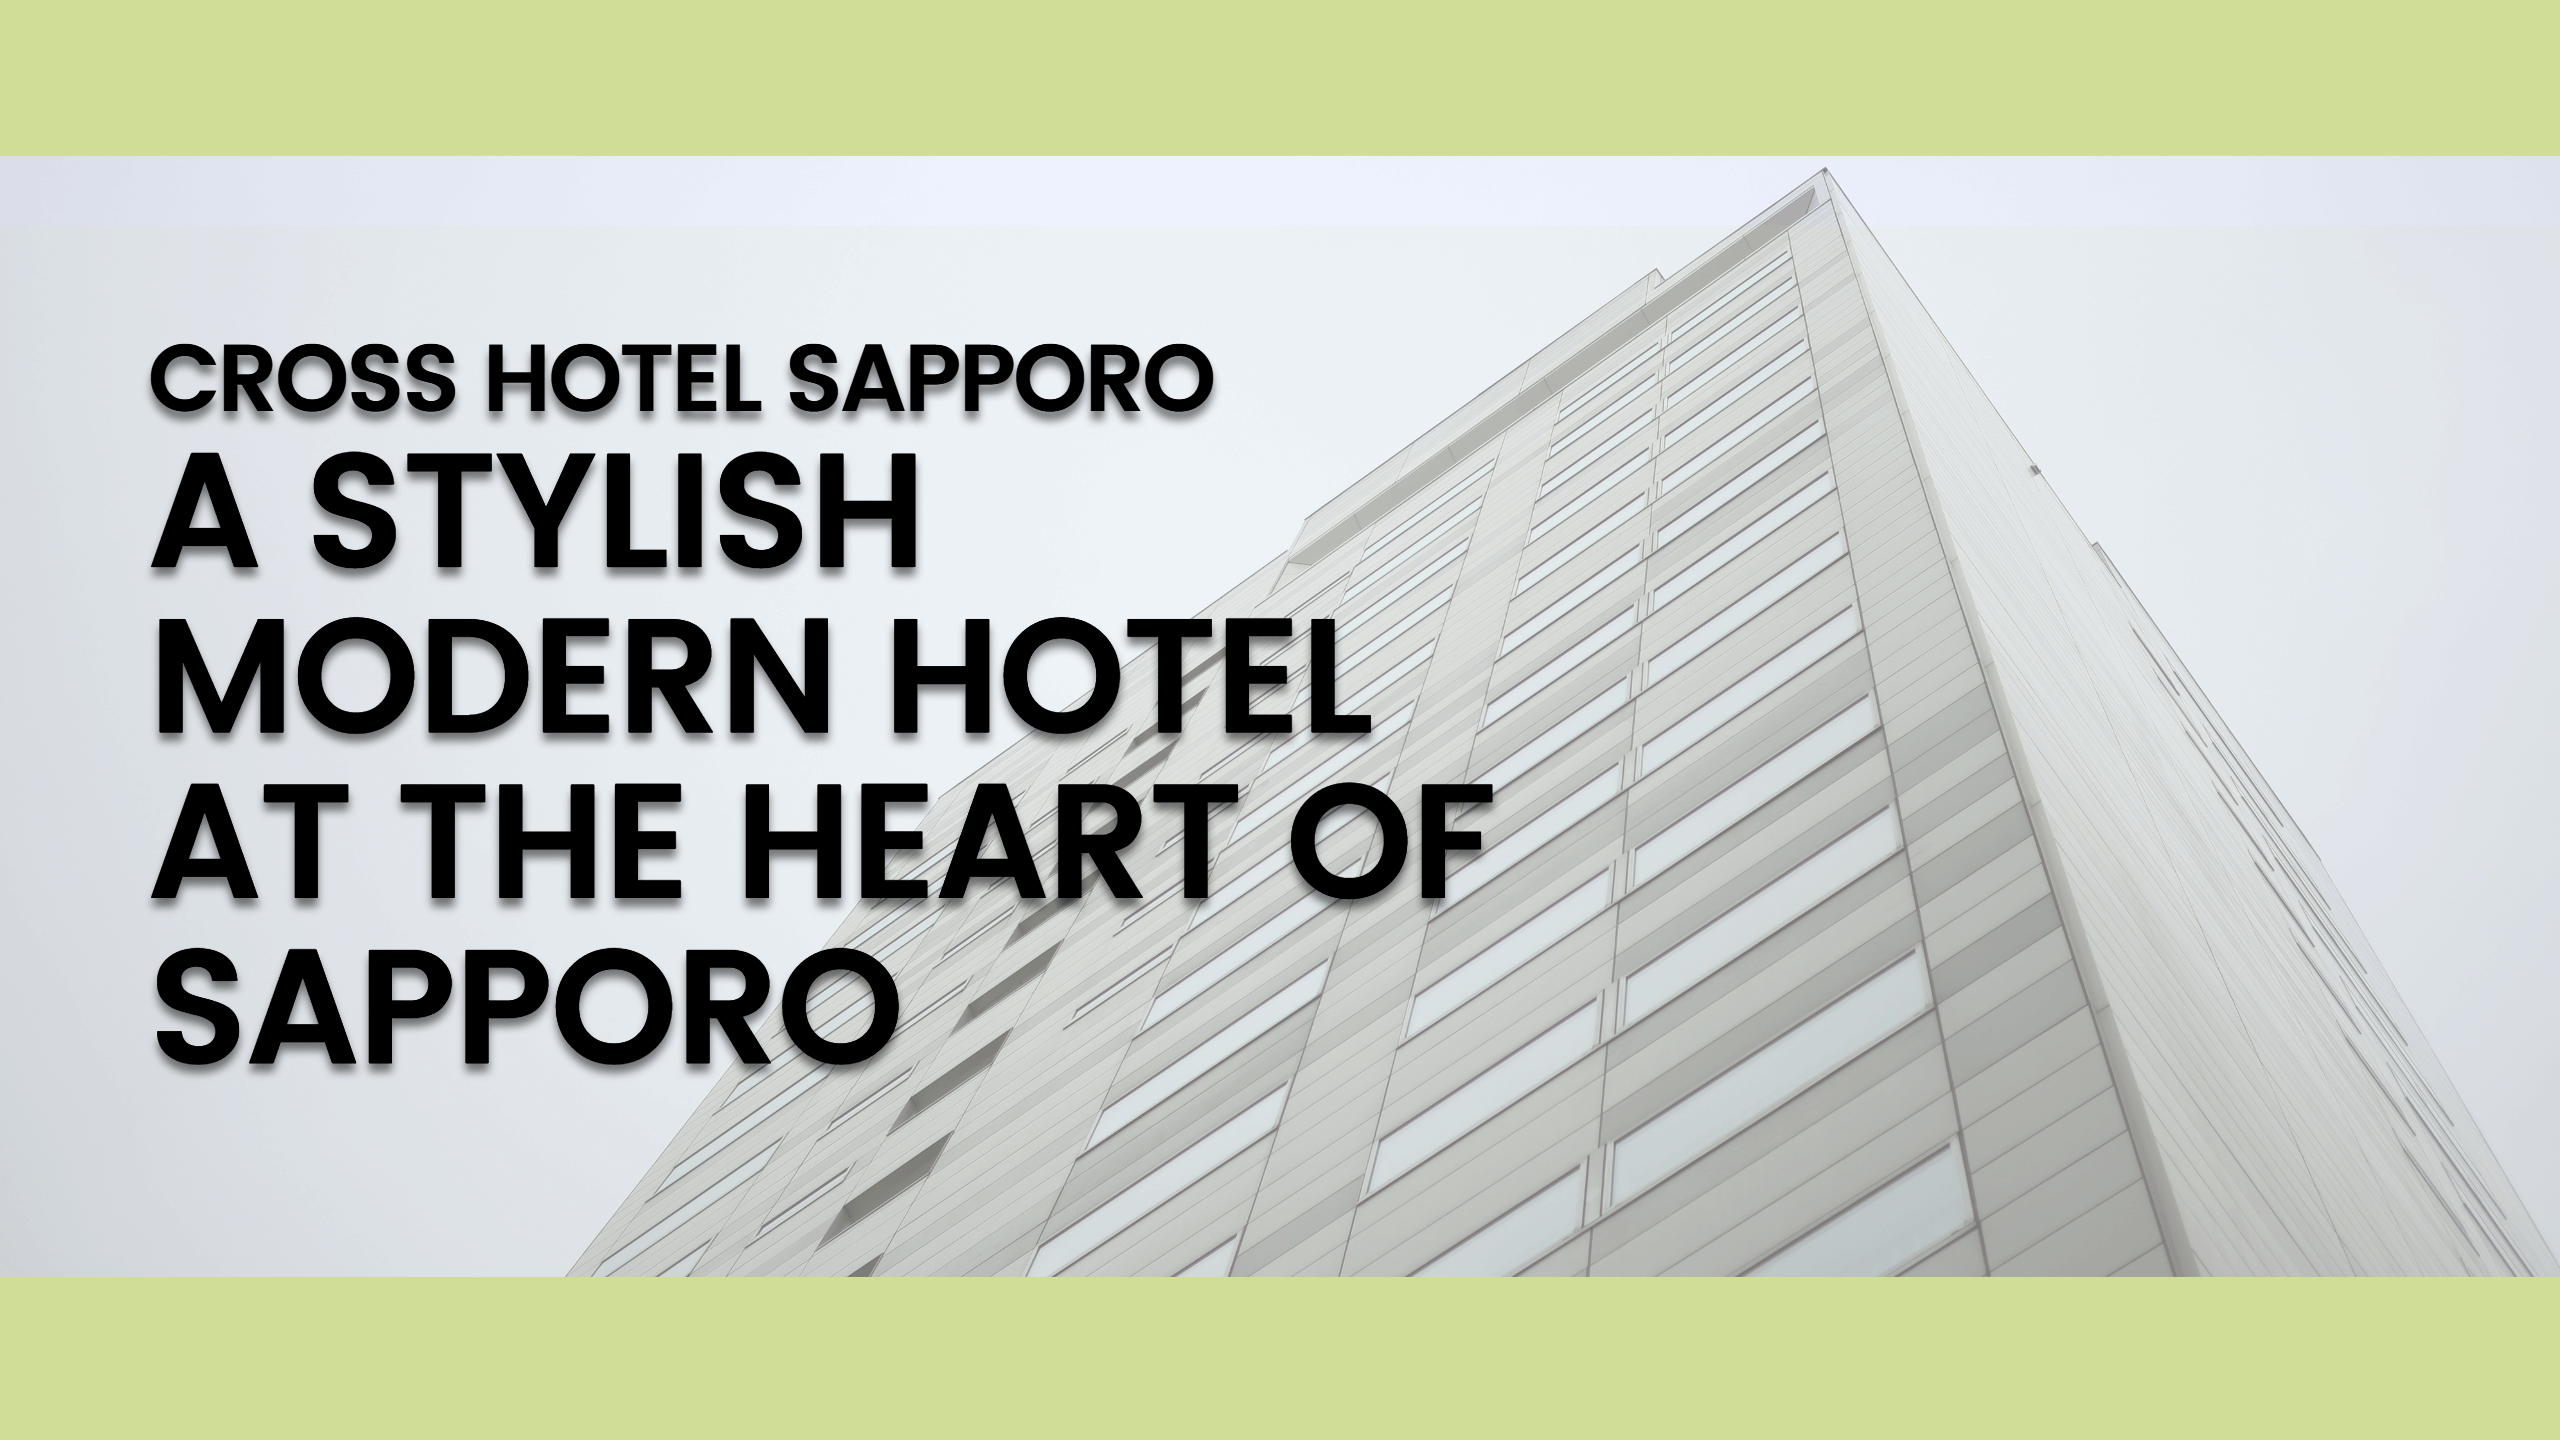 Cross Hotel Sapporo: A stylish modern hotel at the heart of Sapporo